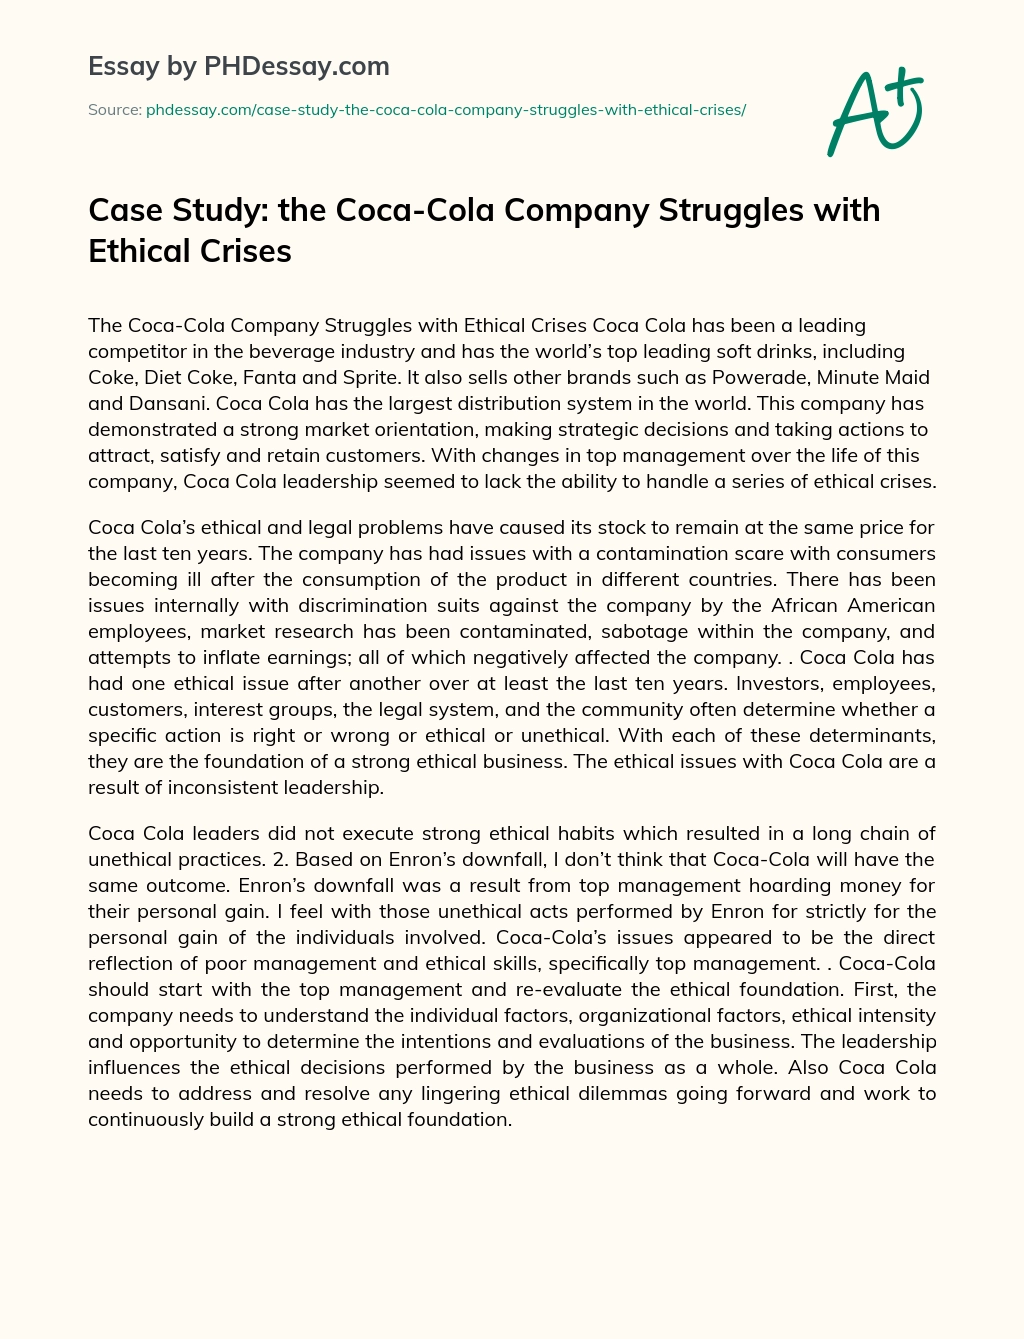 Case Study: the Coca-Cola Company Struggles with Ethical Crises essay